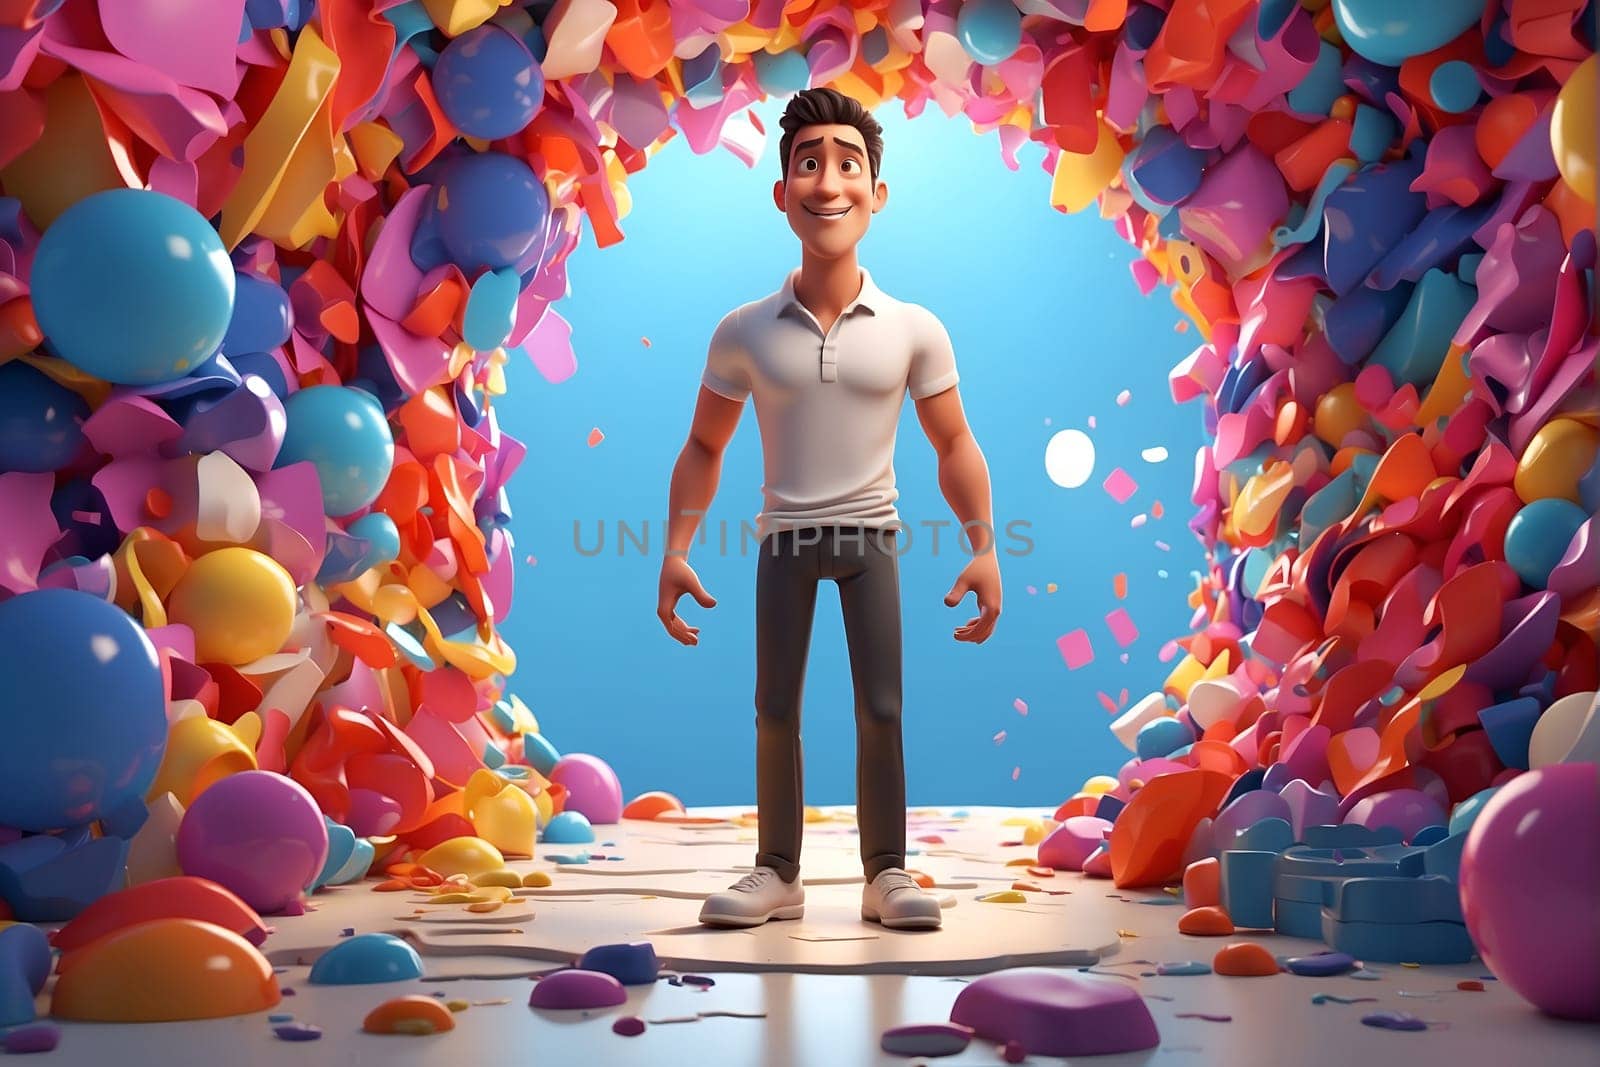 A man stands confidently in a tunnel created by colorful balloons surrounding him.